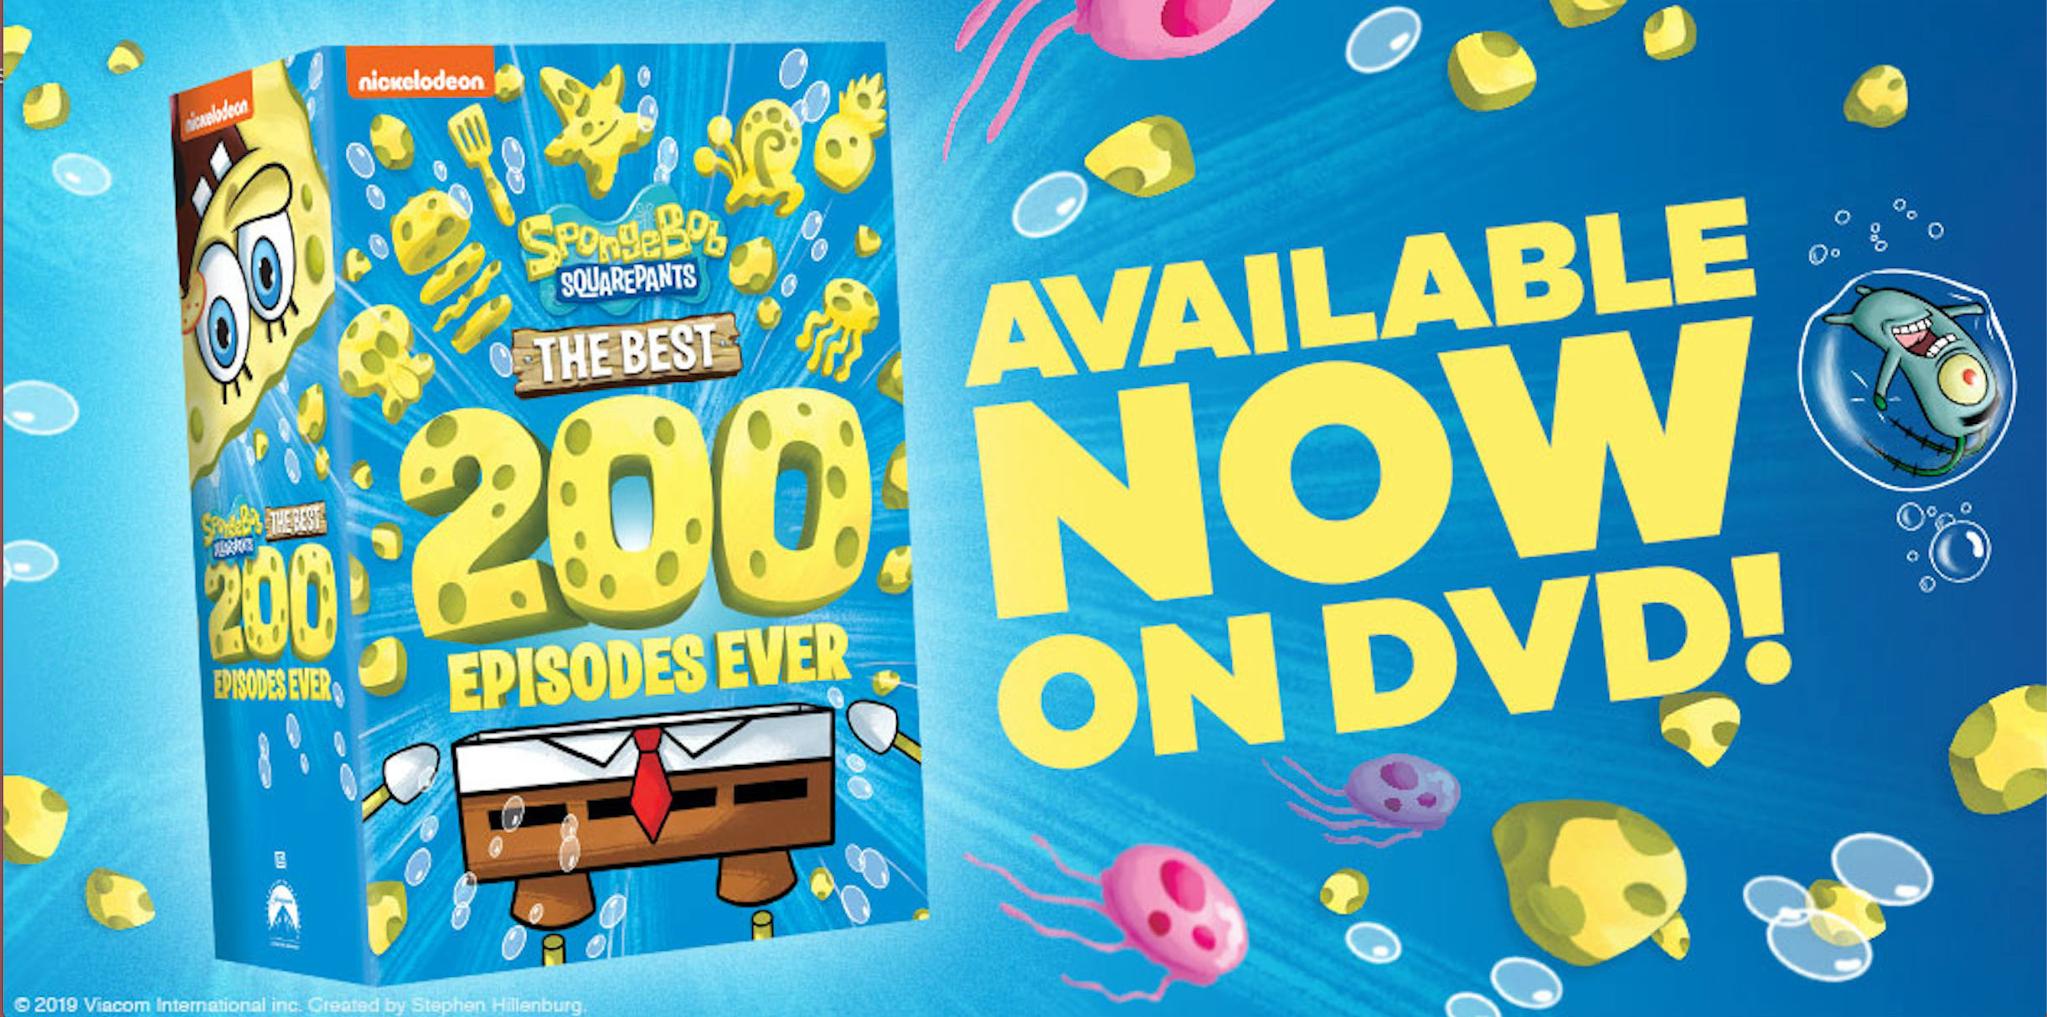 Spongebob We Do Need Television As Long As We Have Spongebob S Best 0 Episodes Ever Dvd Collection Exclusively On Amazon For Primeday T Co Qhuklj6dbi T Co Tqajduyqj7